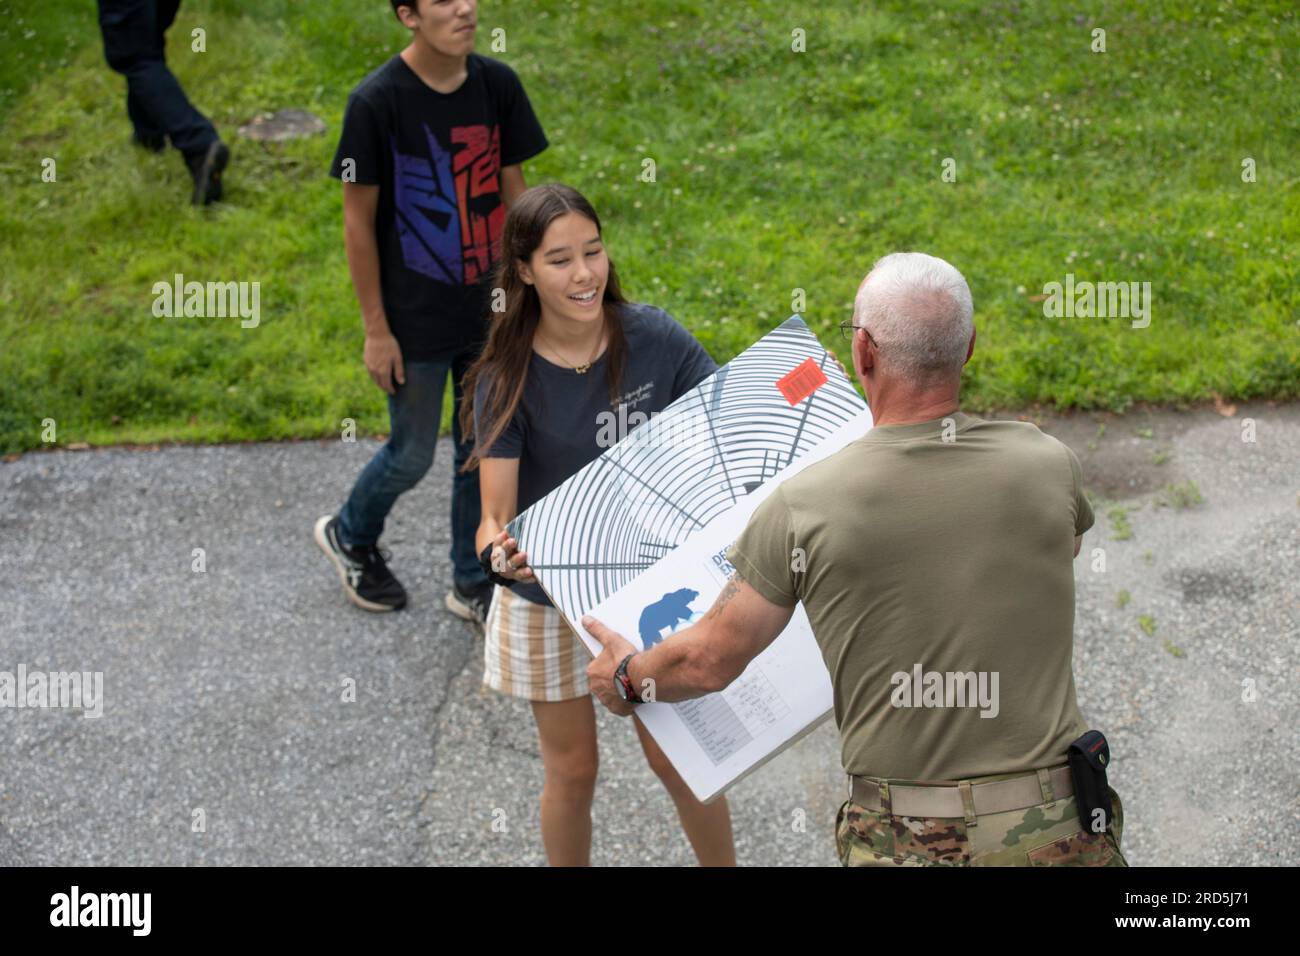 Hardwick, United States Of America. 17th July, 2023. Hardwick, United States of America. 17 July, 2023. A U.S. Army soldier with the Vermont Army National Guard, right, hands a donated electric fan to a young resident in the aftermath of floods, July 17, 2023 in Hardwick, Vermont. Soldiers helped organize and distribute donated items to towns affected by flooding across Vermont. Credit: Sgt. Denis Nunez/U.S. Army Photo/Alamy Live News Stock Photo